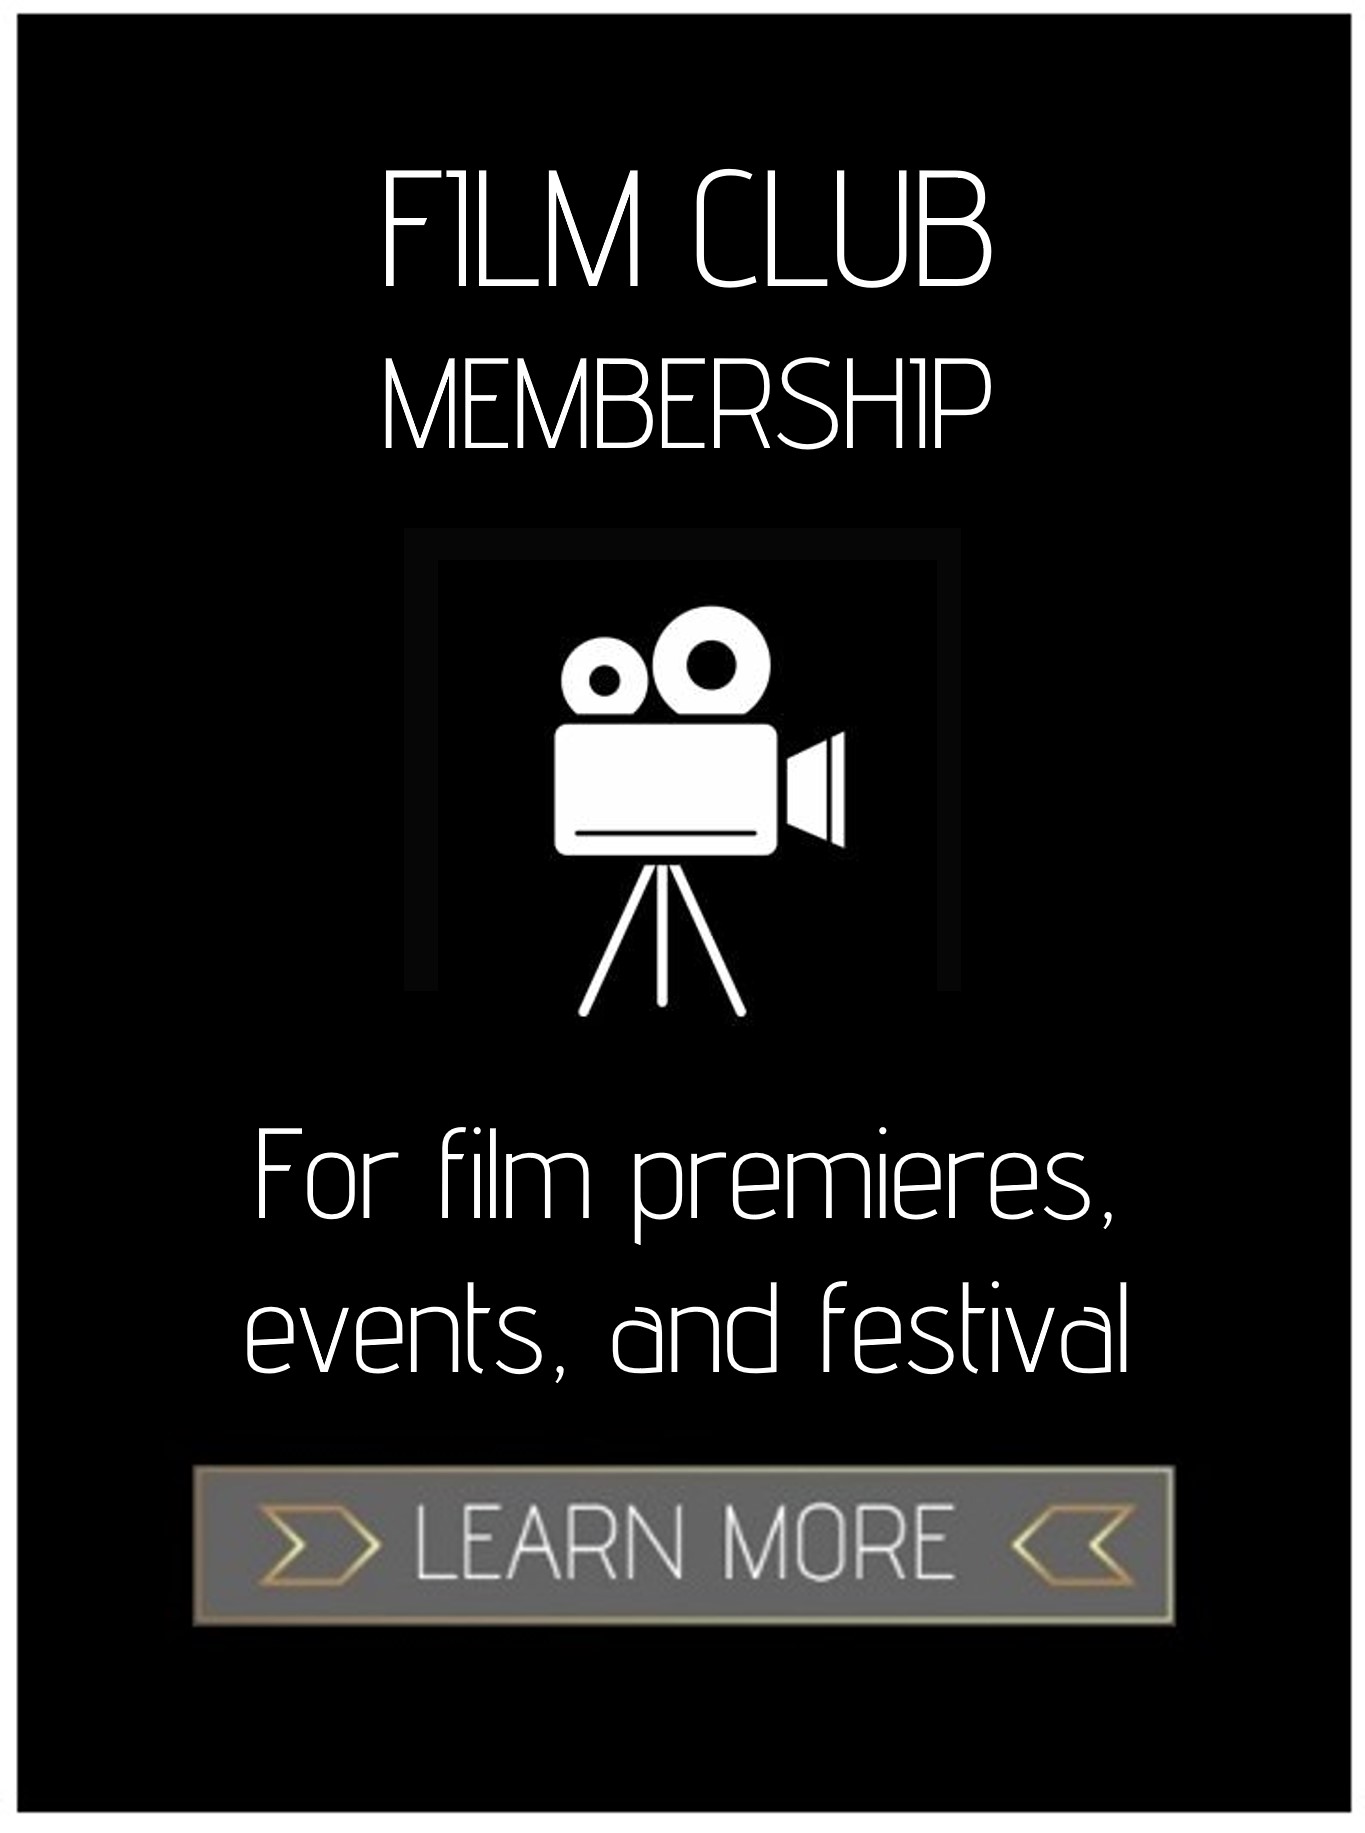 join sincura film club membership for access to the latest film premieres, cannes film festival, evnets and backstage passes